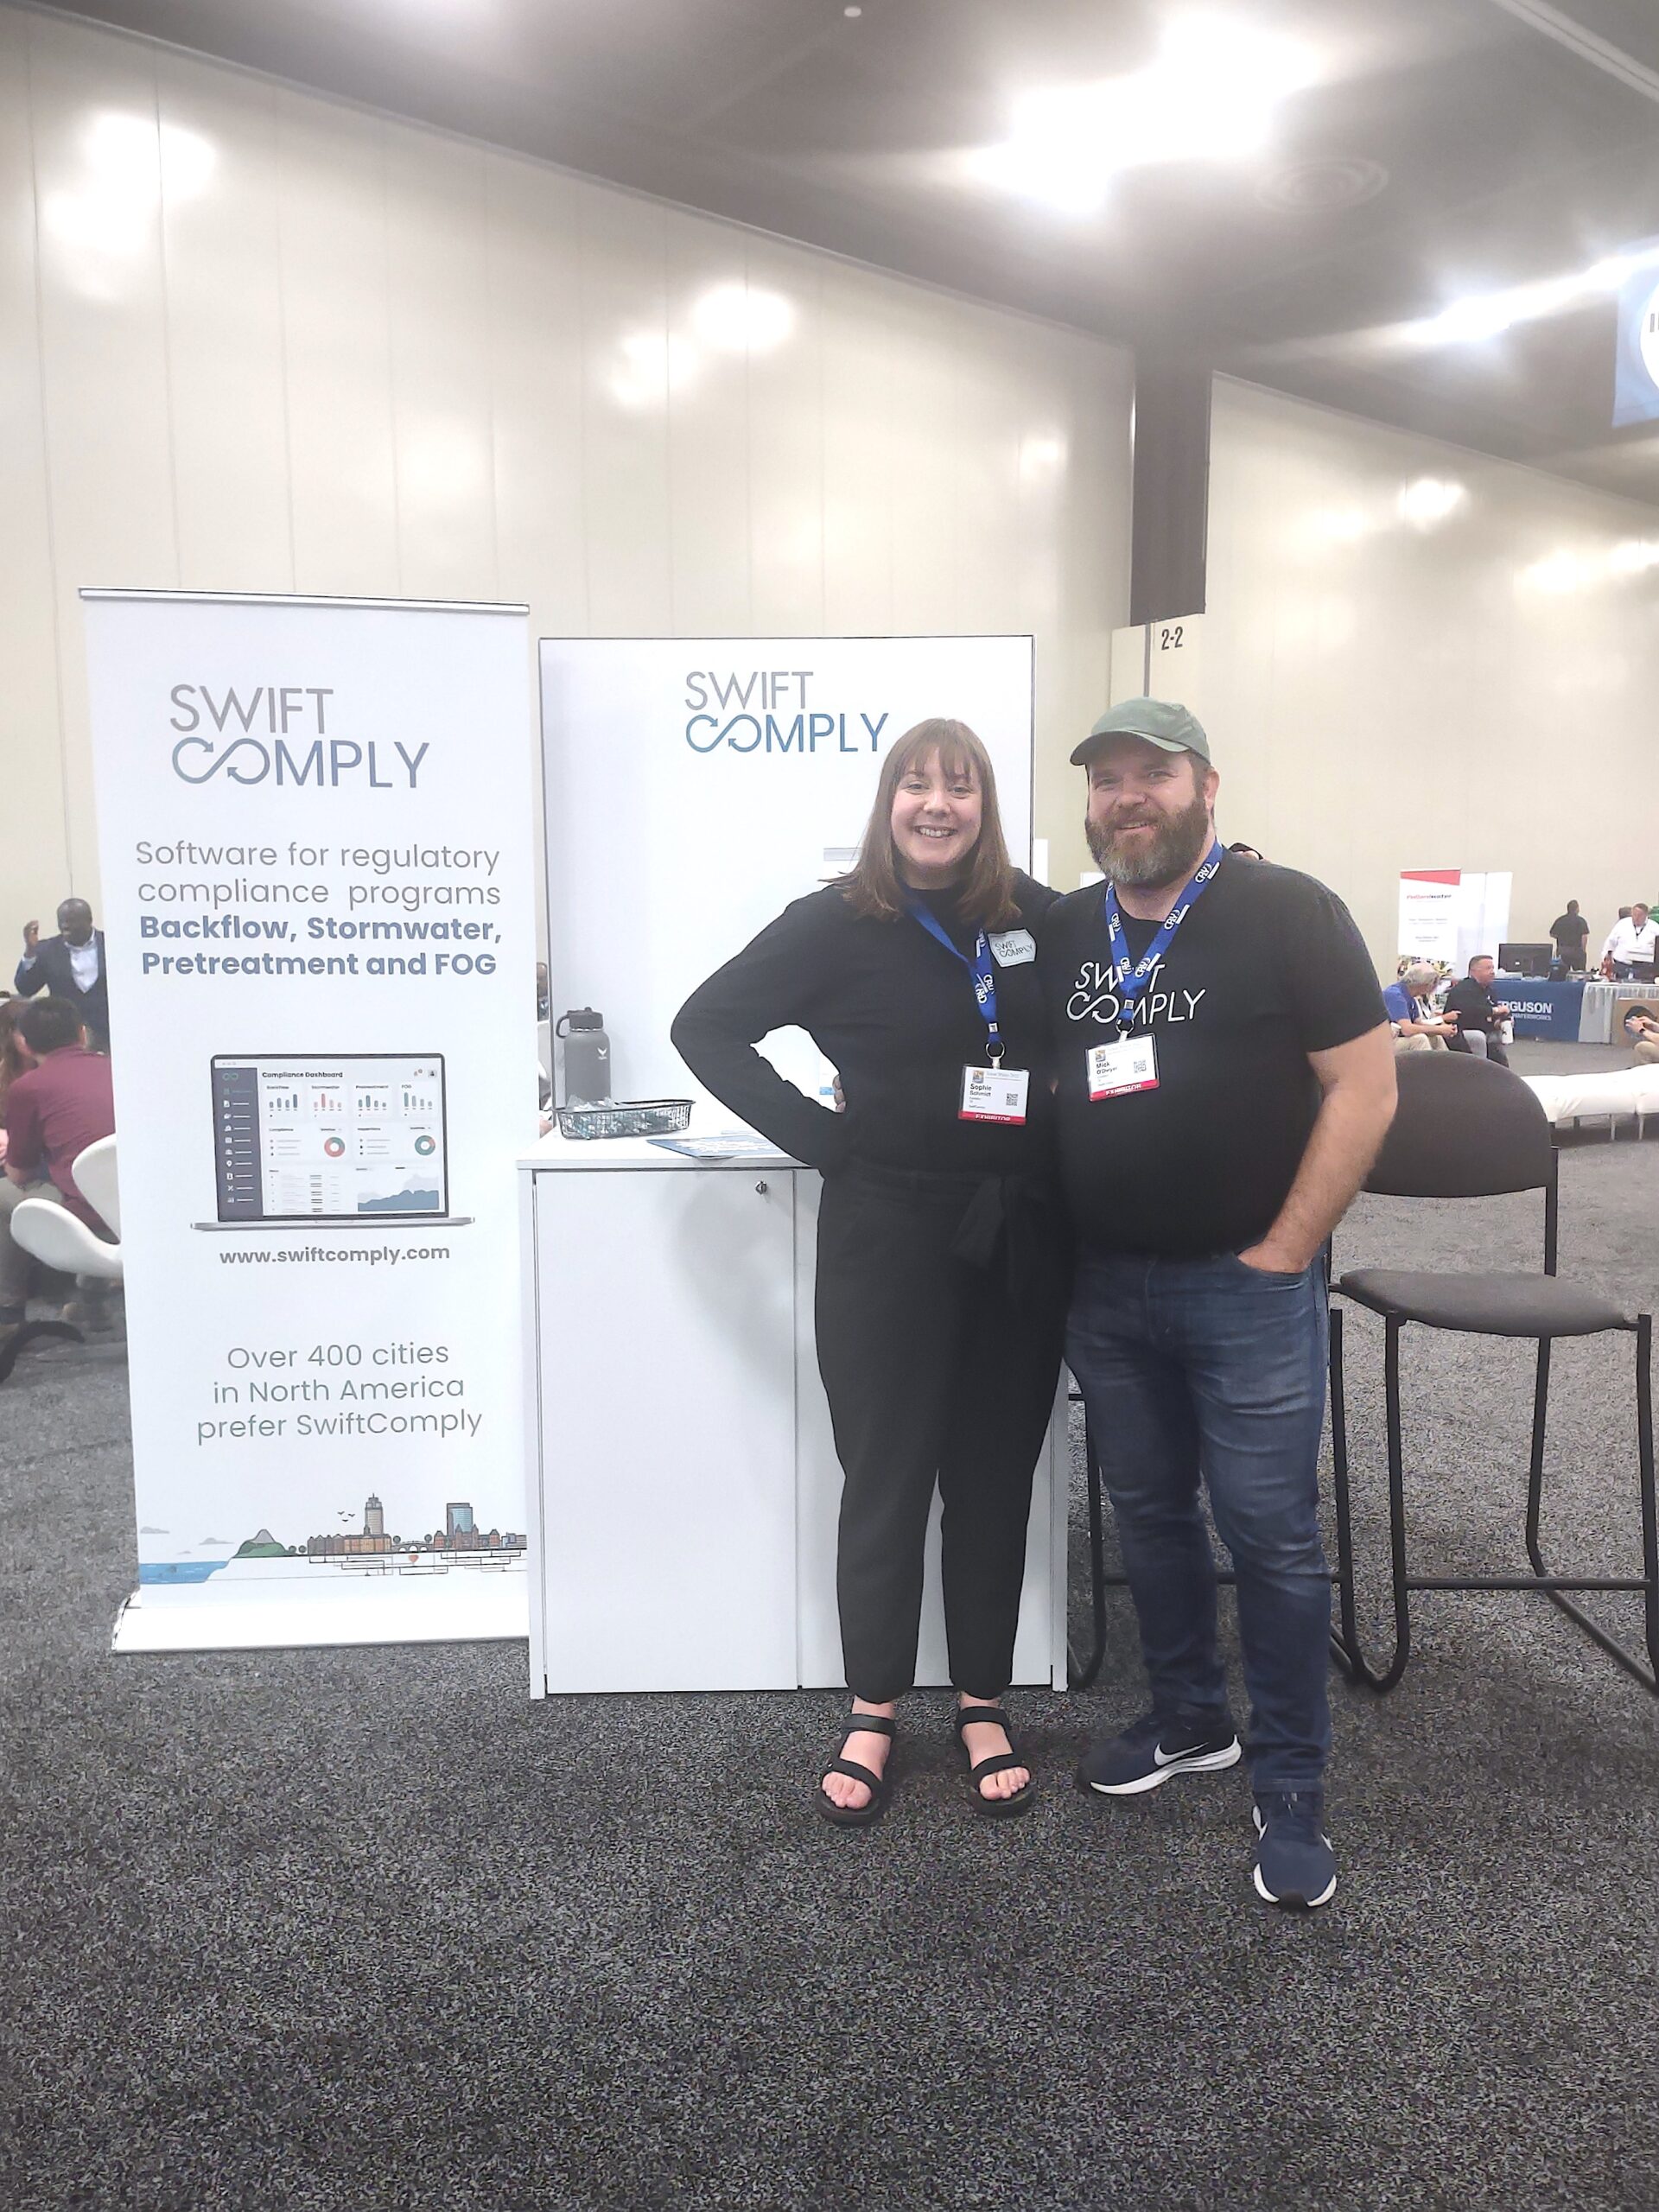 Mick and Sophie from SwiftComply in front of posters at a conference